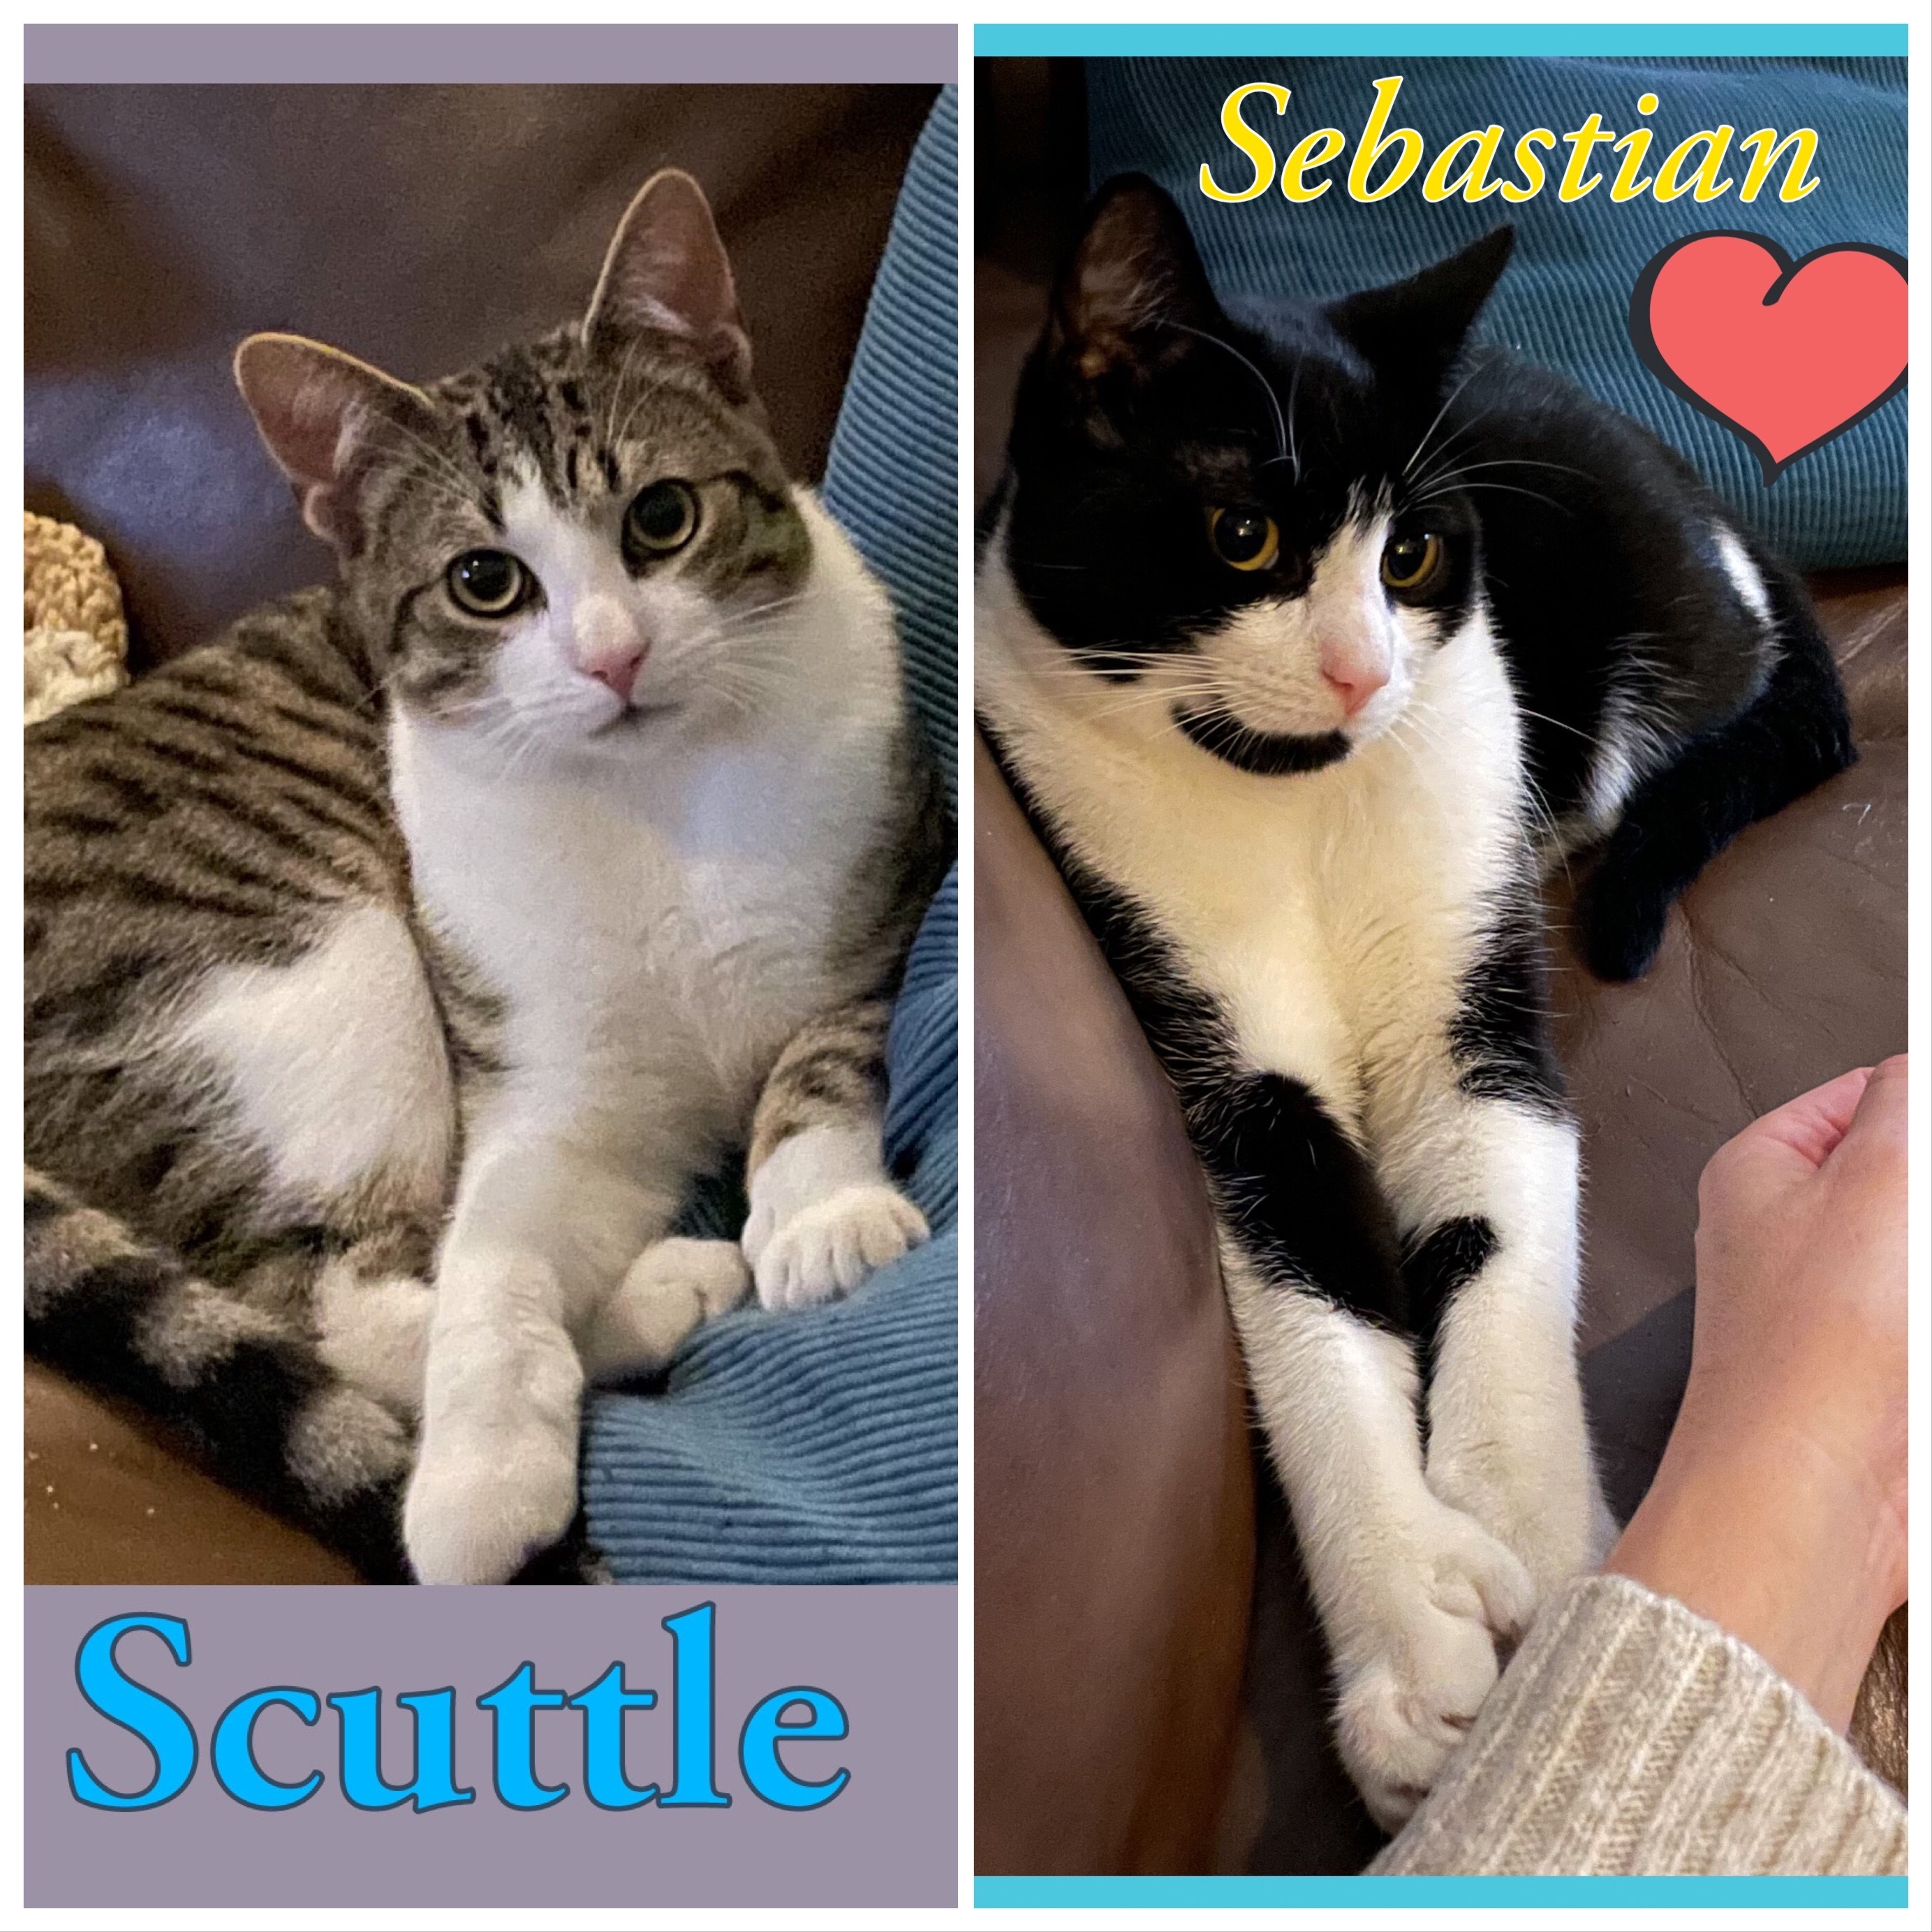 Sebastian The Polydactyl And Scuttle The Snugglebug detail page